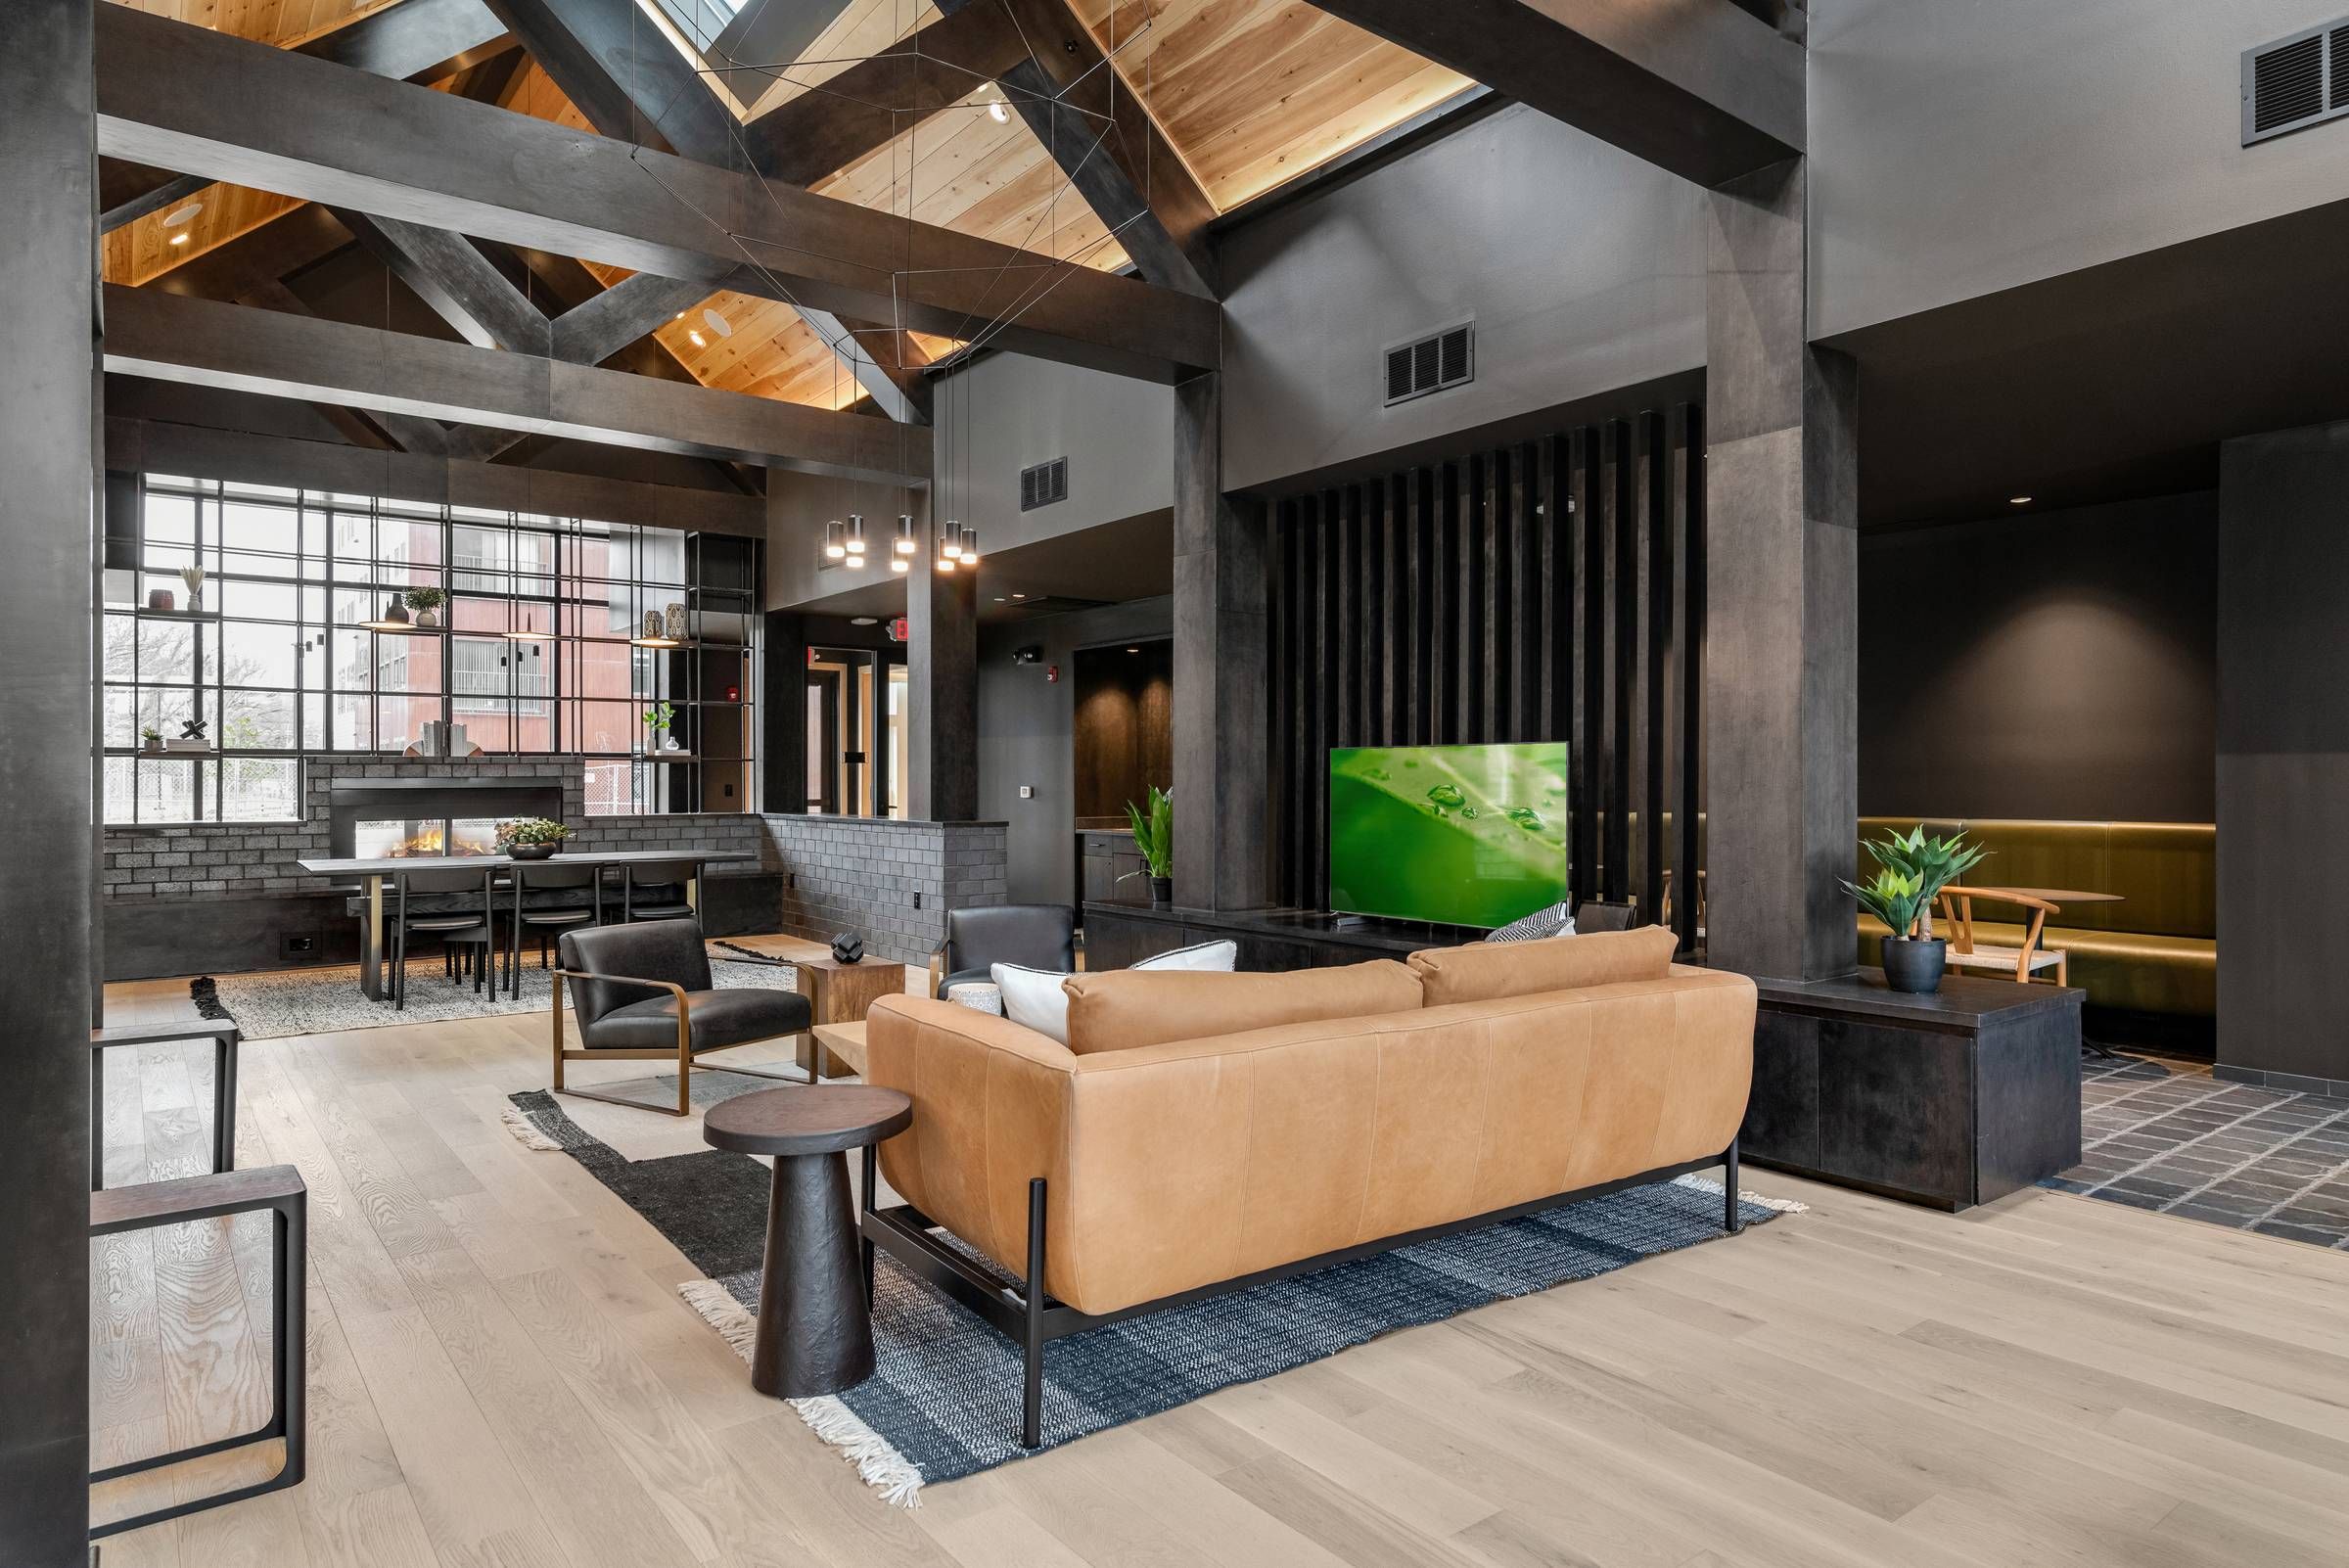 Alta Riverwalk clubhouse lounge area with ample seating and a TV.